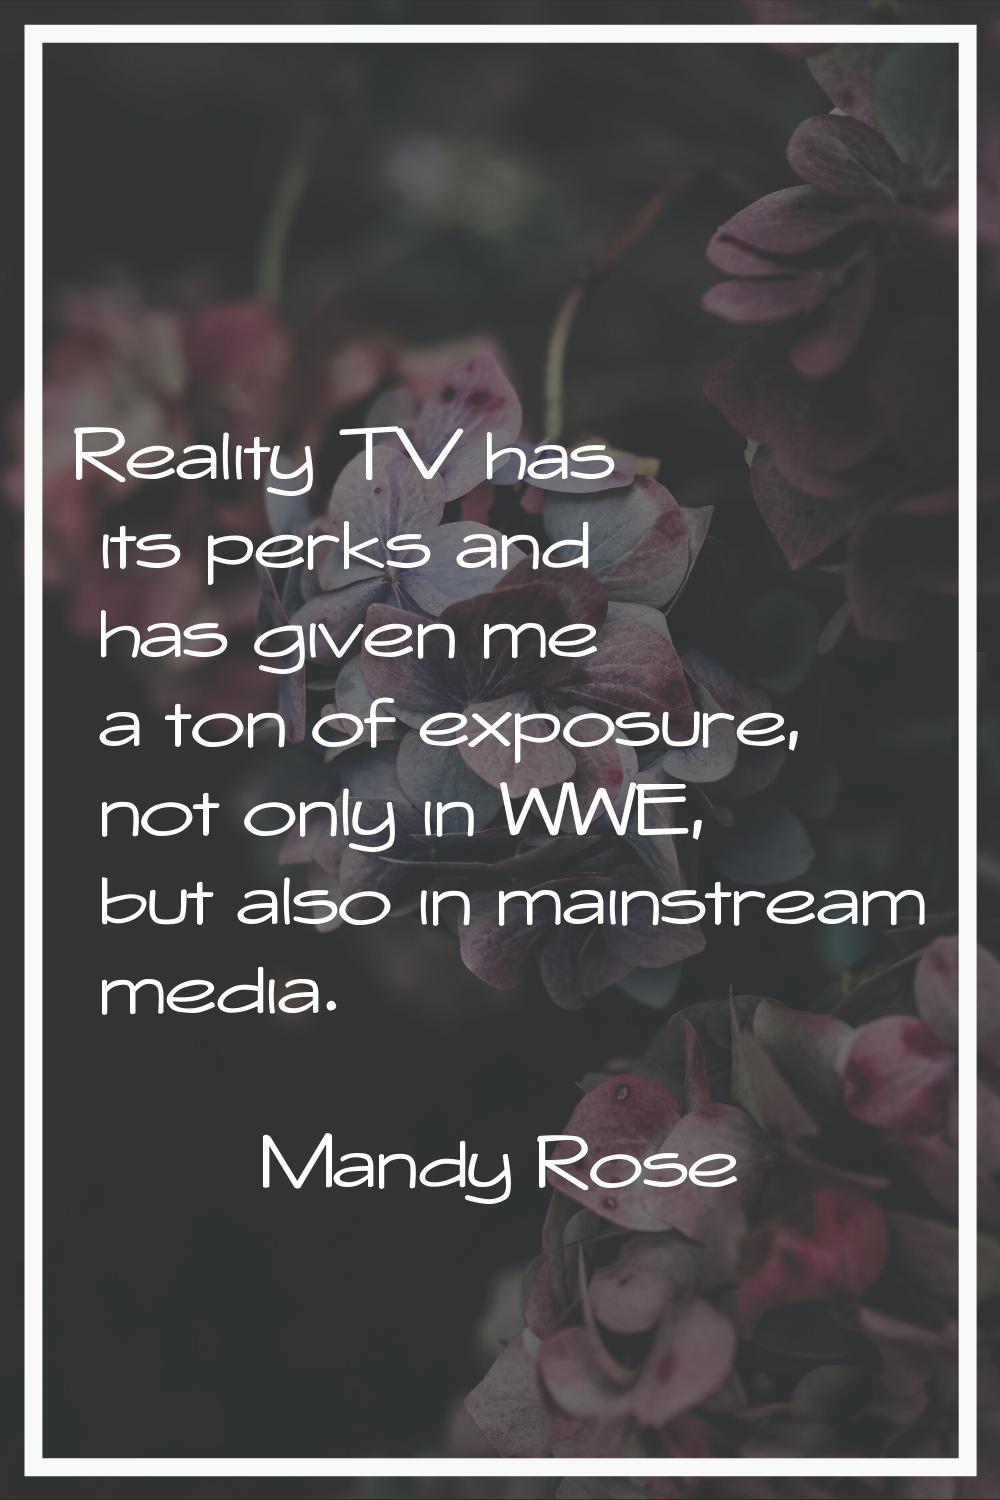 Reality TV has its perks and has given me a ton of exposure, not only in WWE, but also in mainstrea